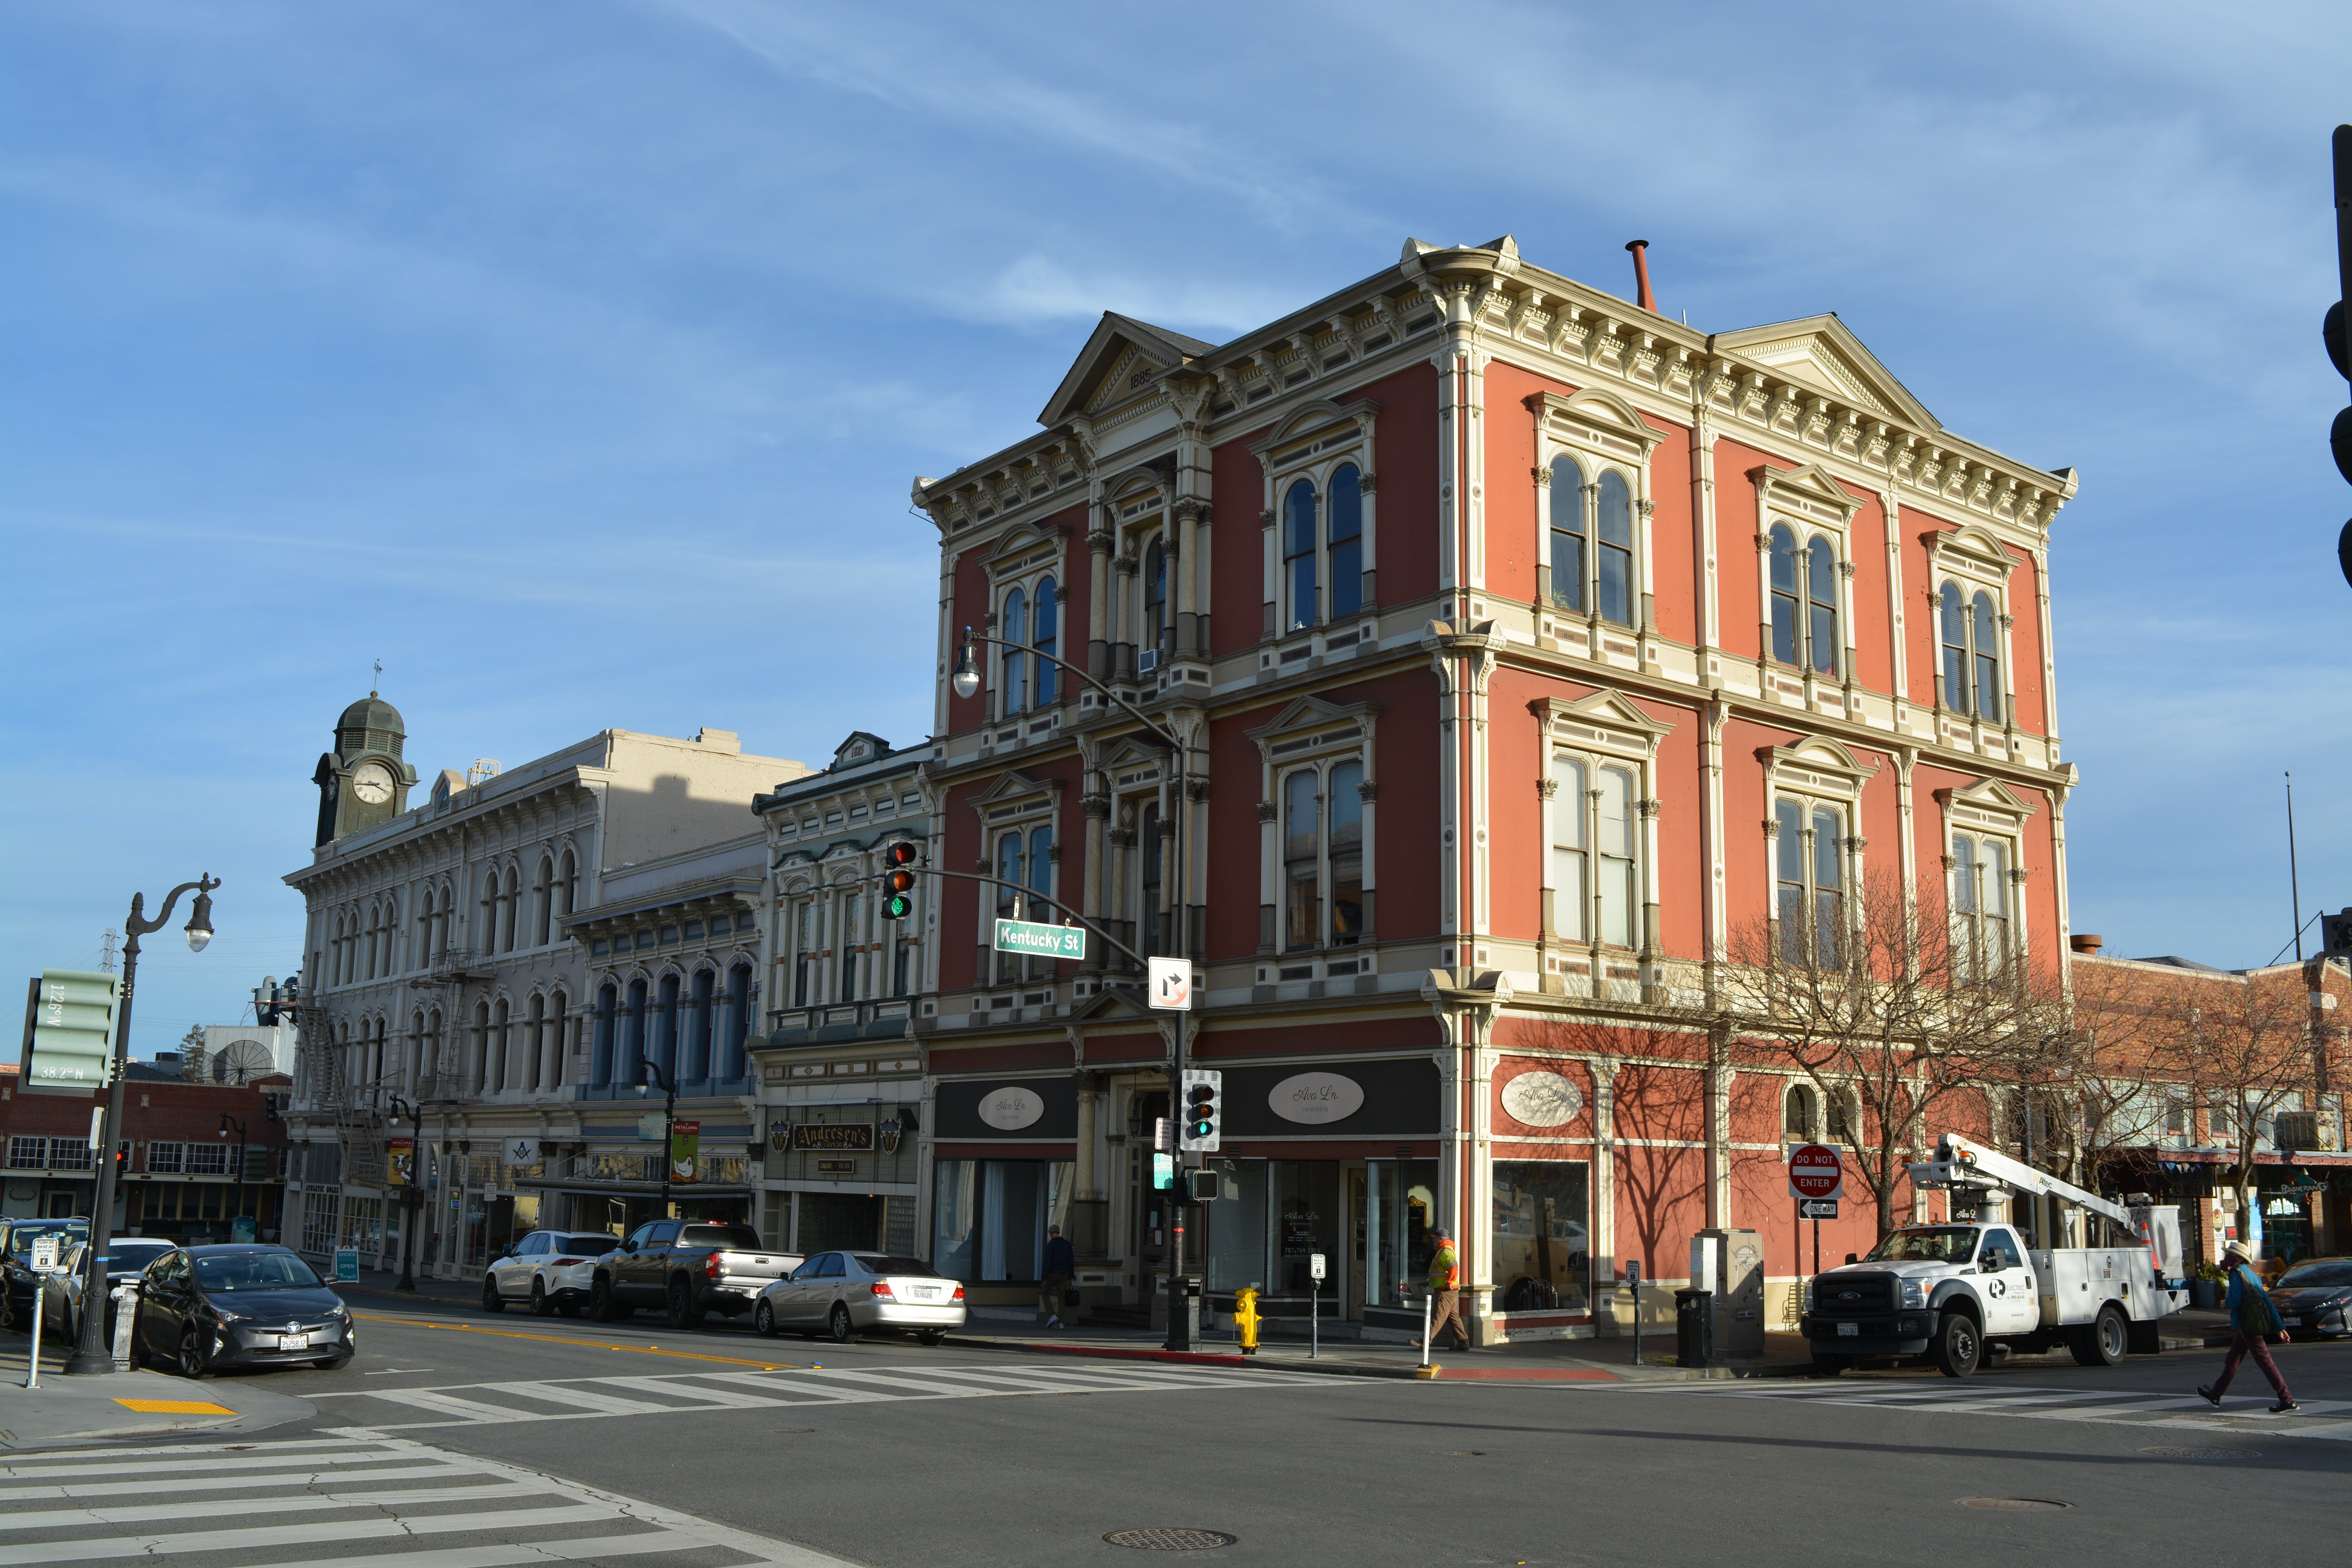 Petaluma has put an emphasis on building “up and in” as a way to be more sustainable, according to its mayor.